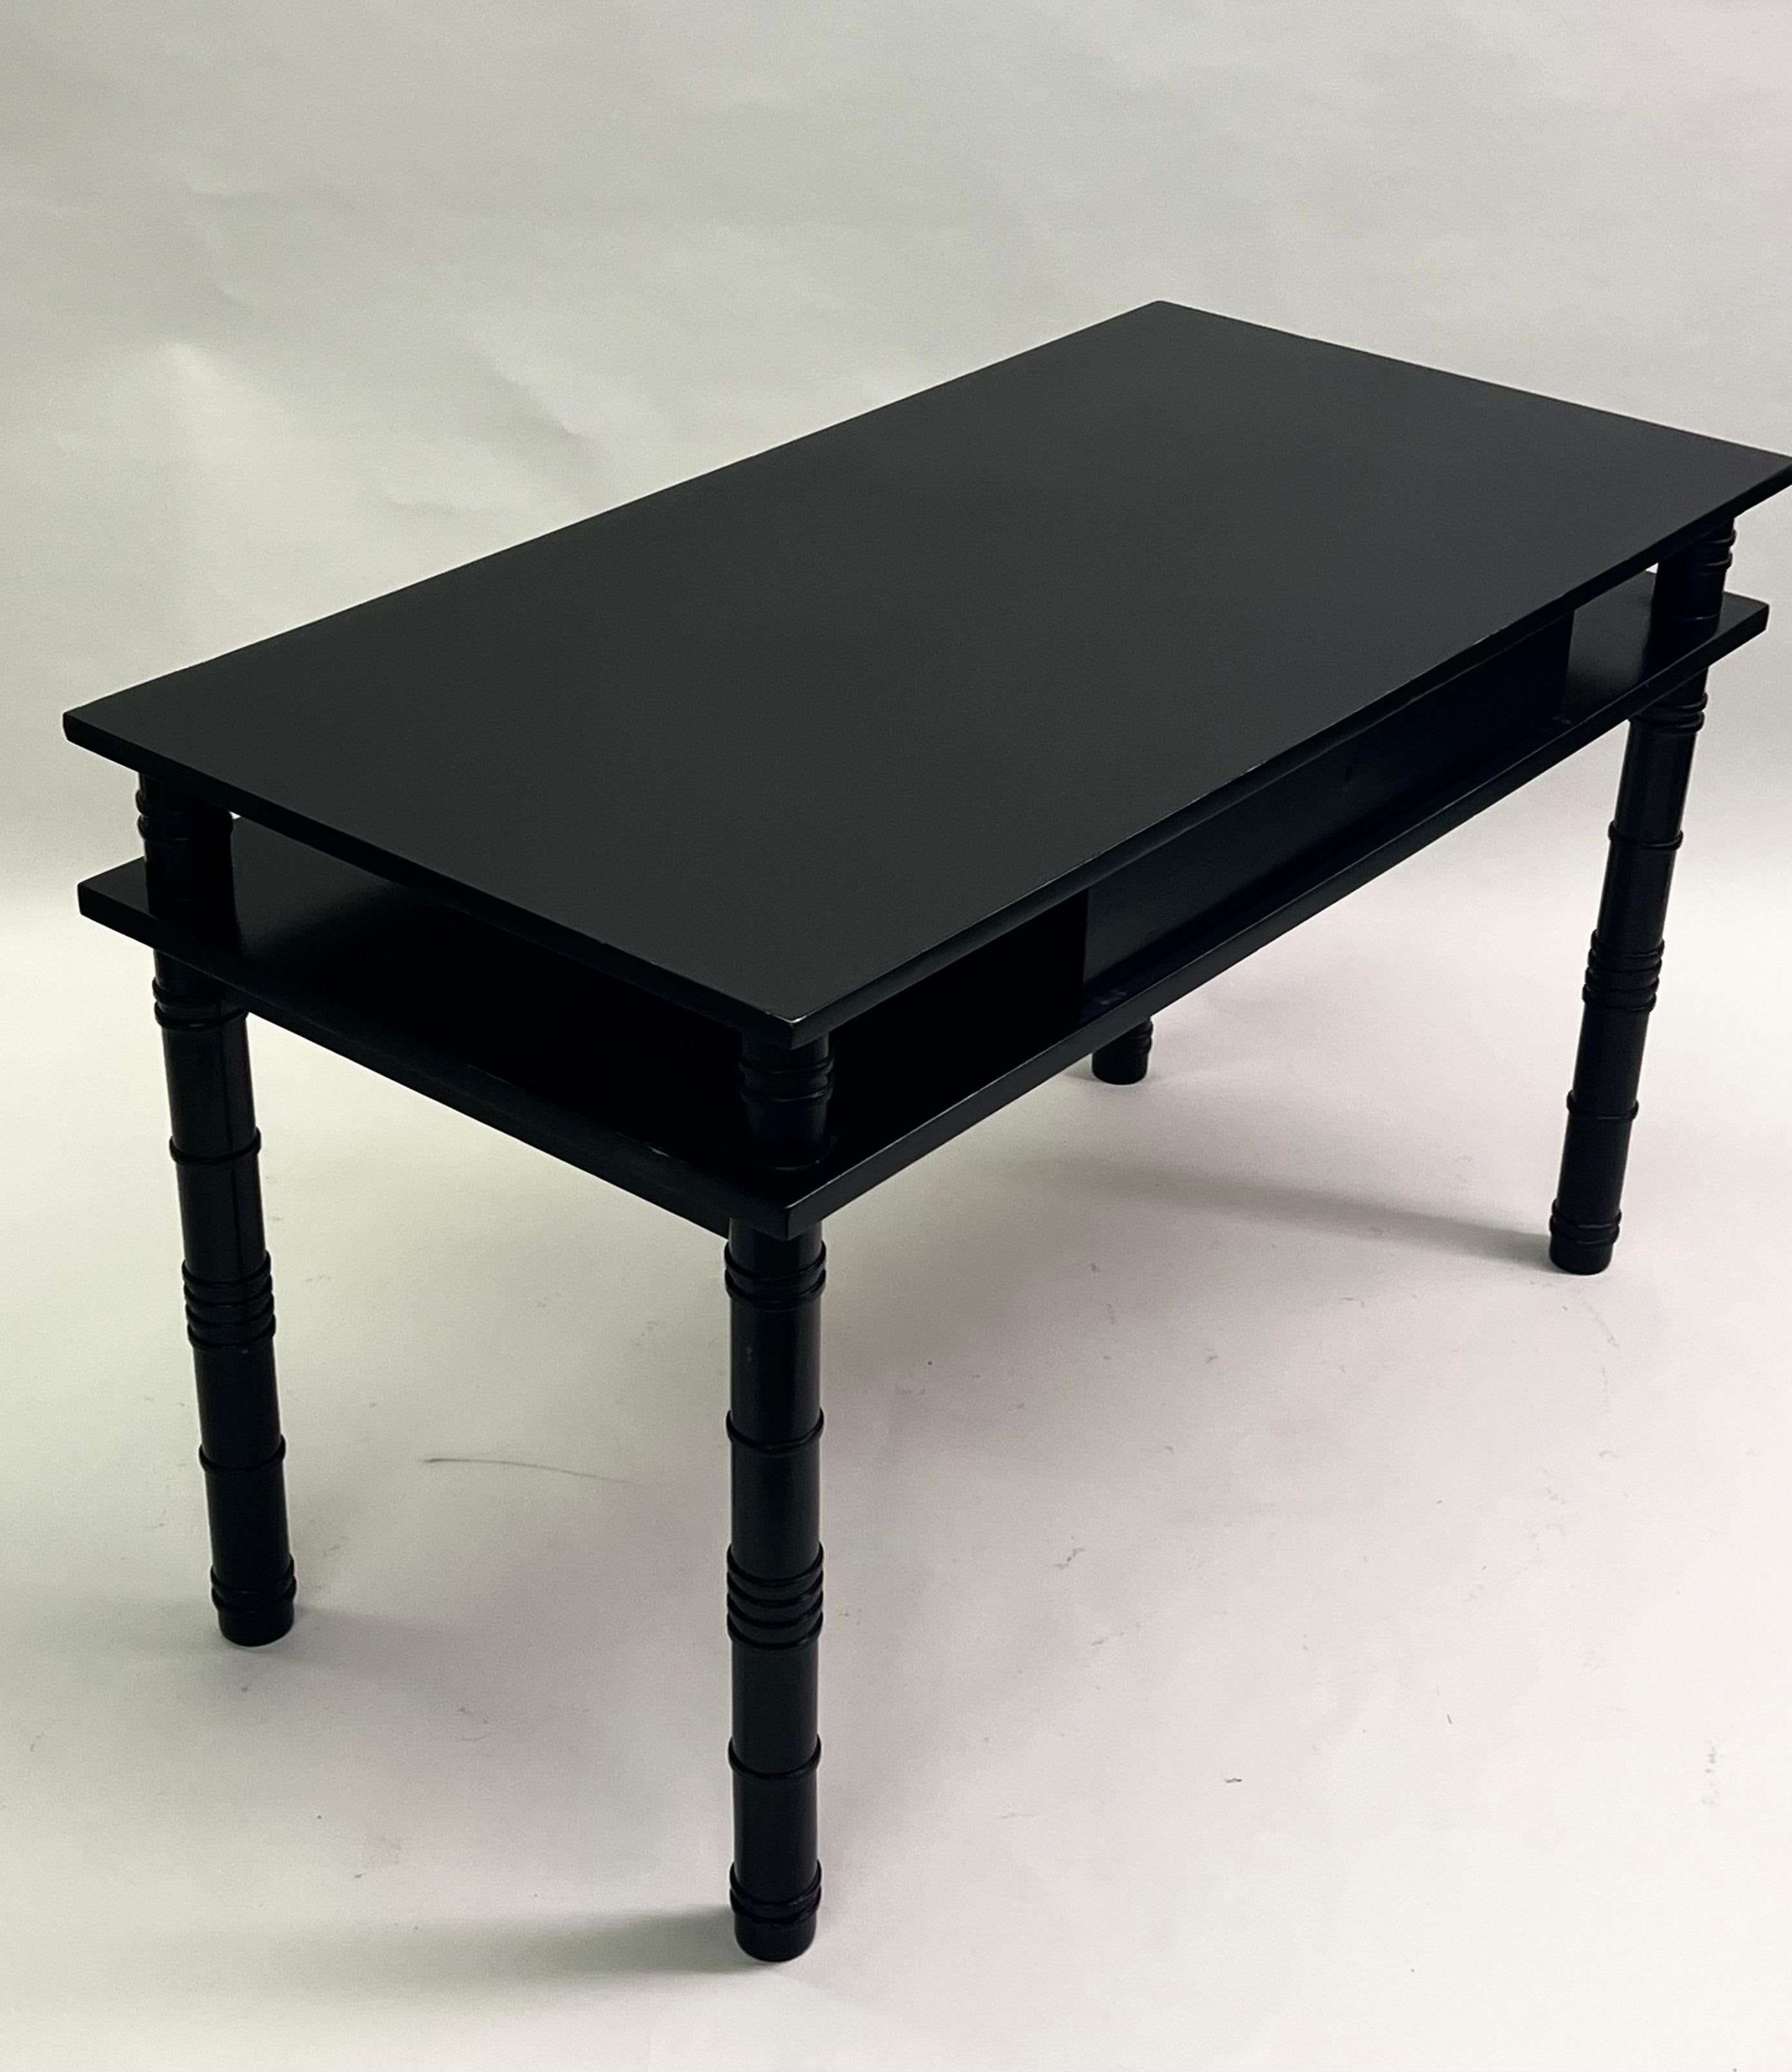 20th Century French MidCentury Modern Neoclassical Ebonized Sycamore Desk by Leon Jallot 1936 For Sale